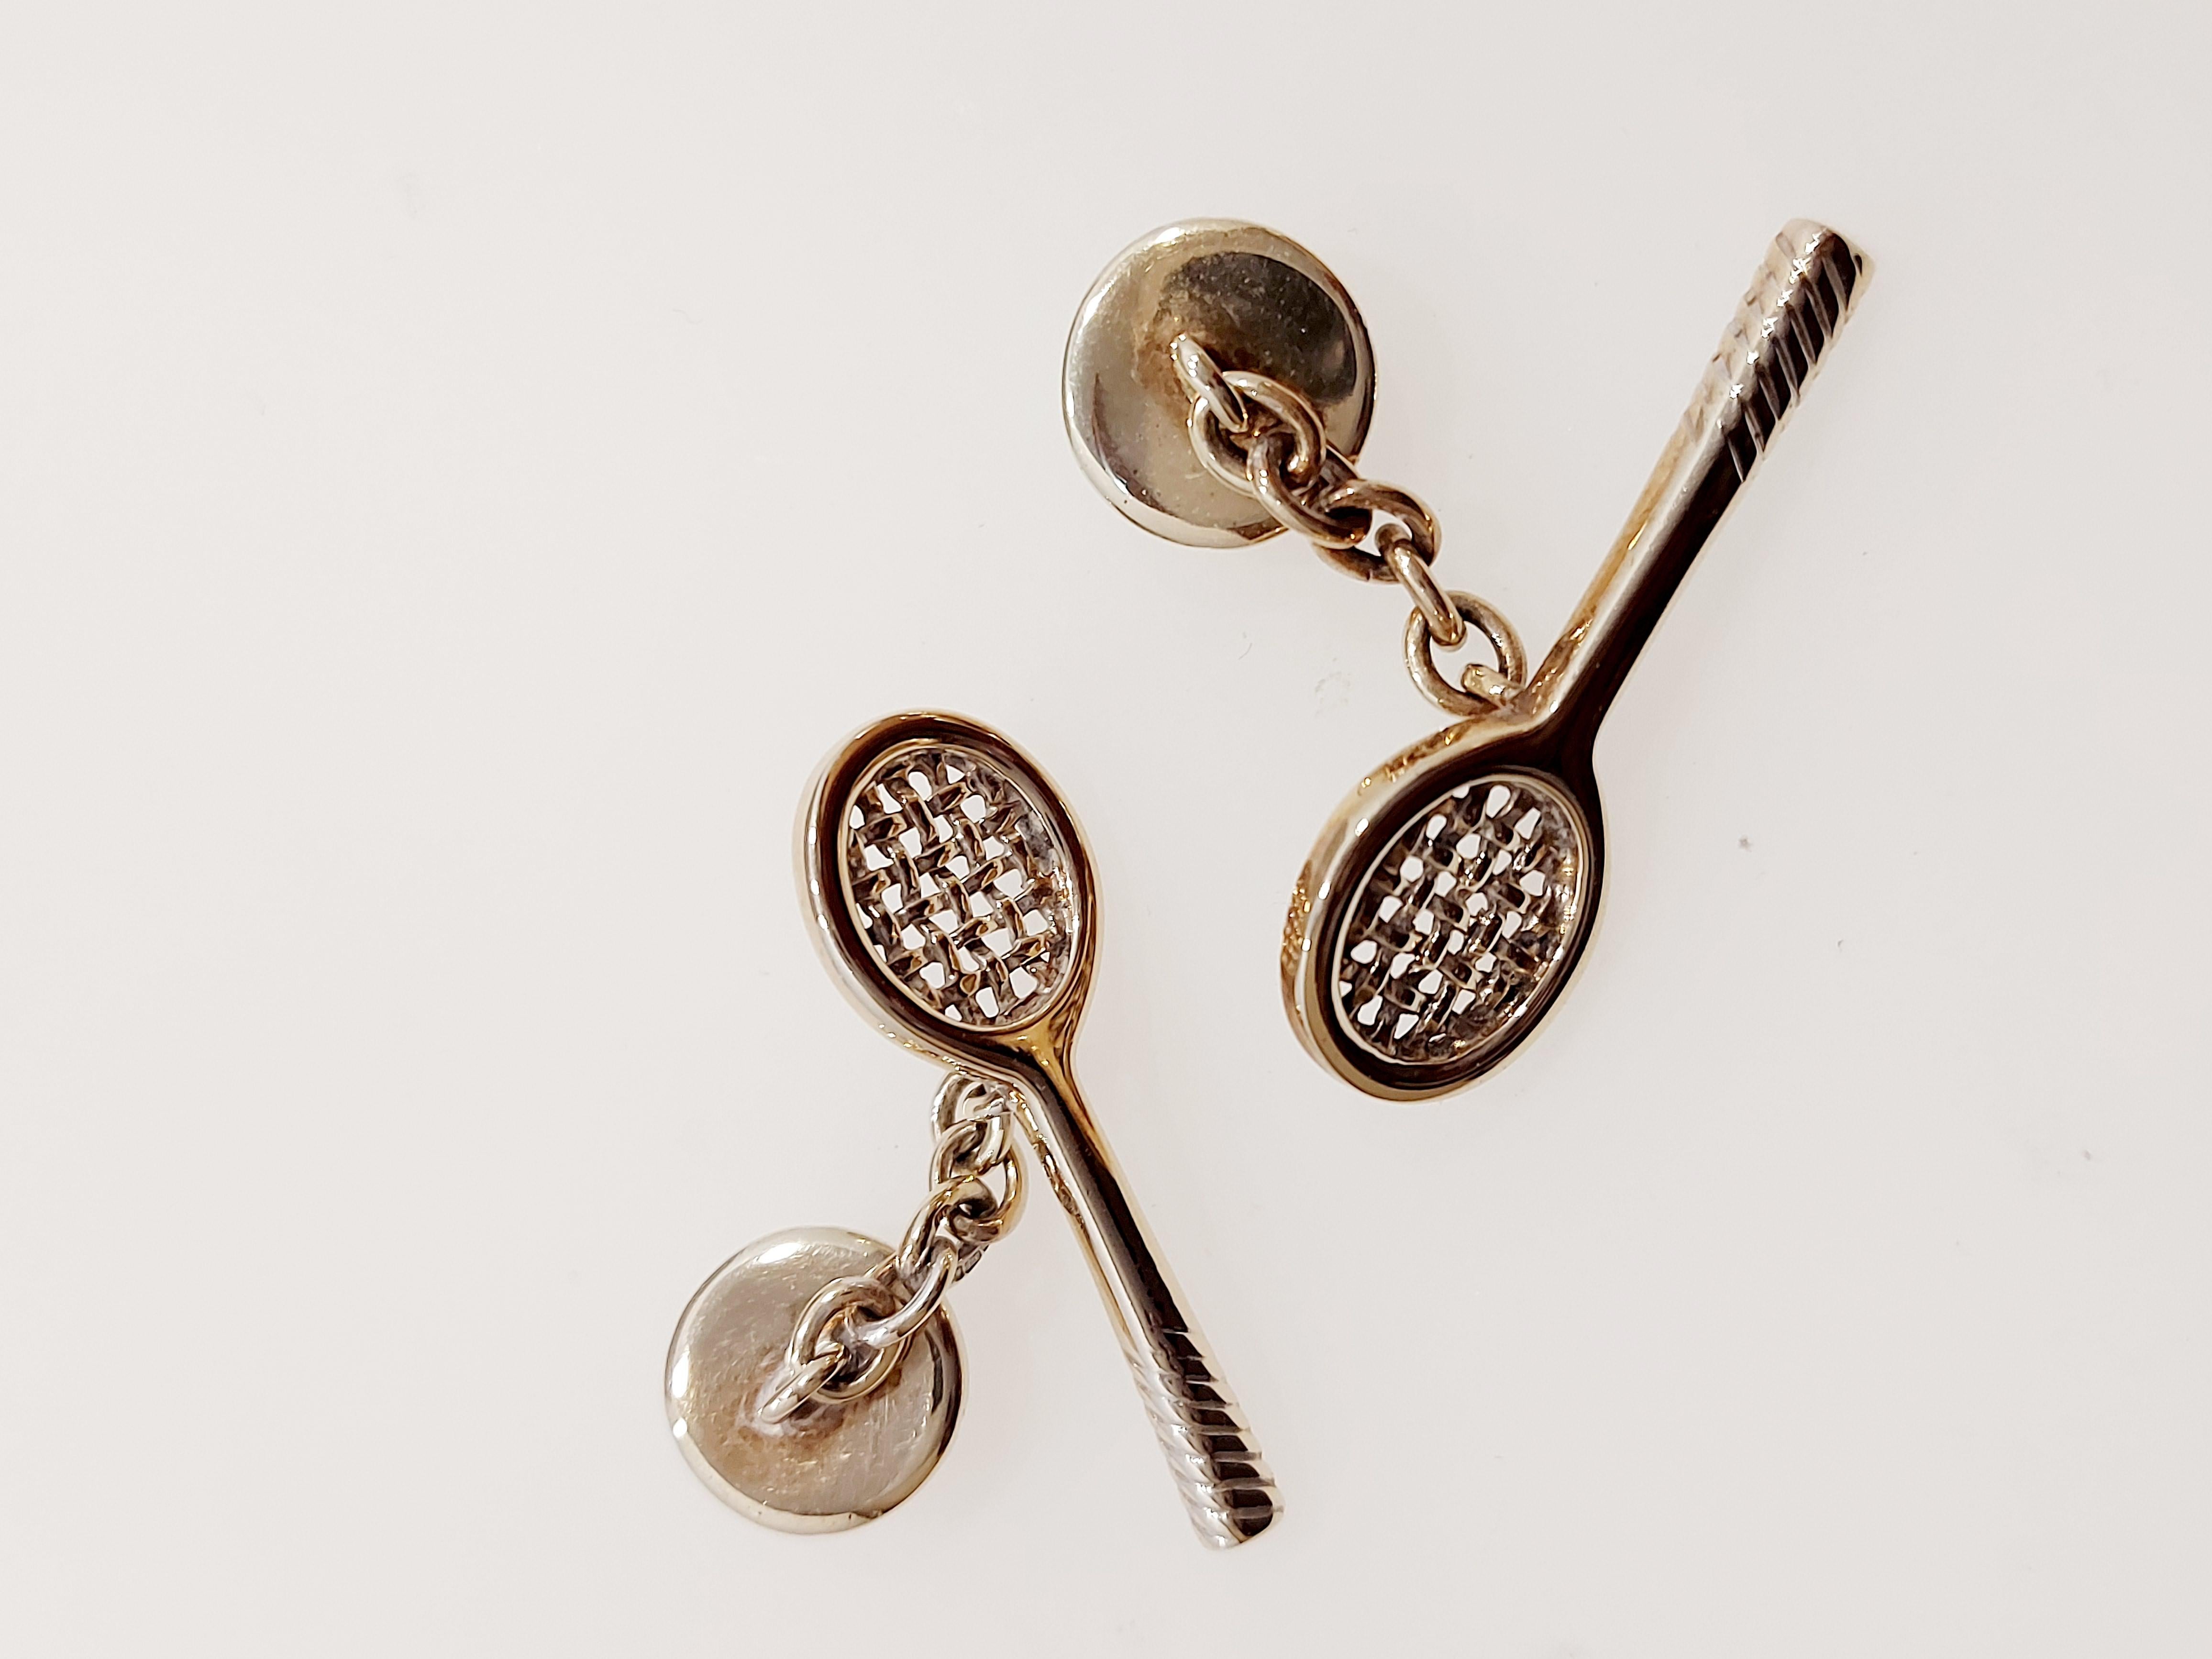 Tennis racket and ball 9ct yellow gold chain link cufflinks made by Links of London. 